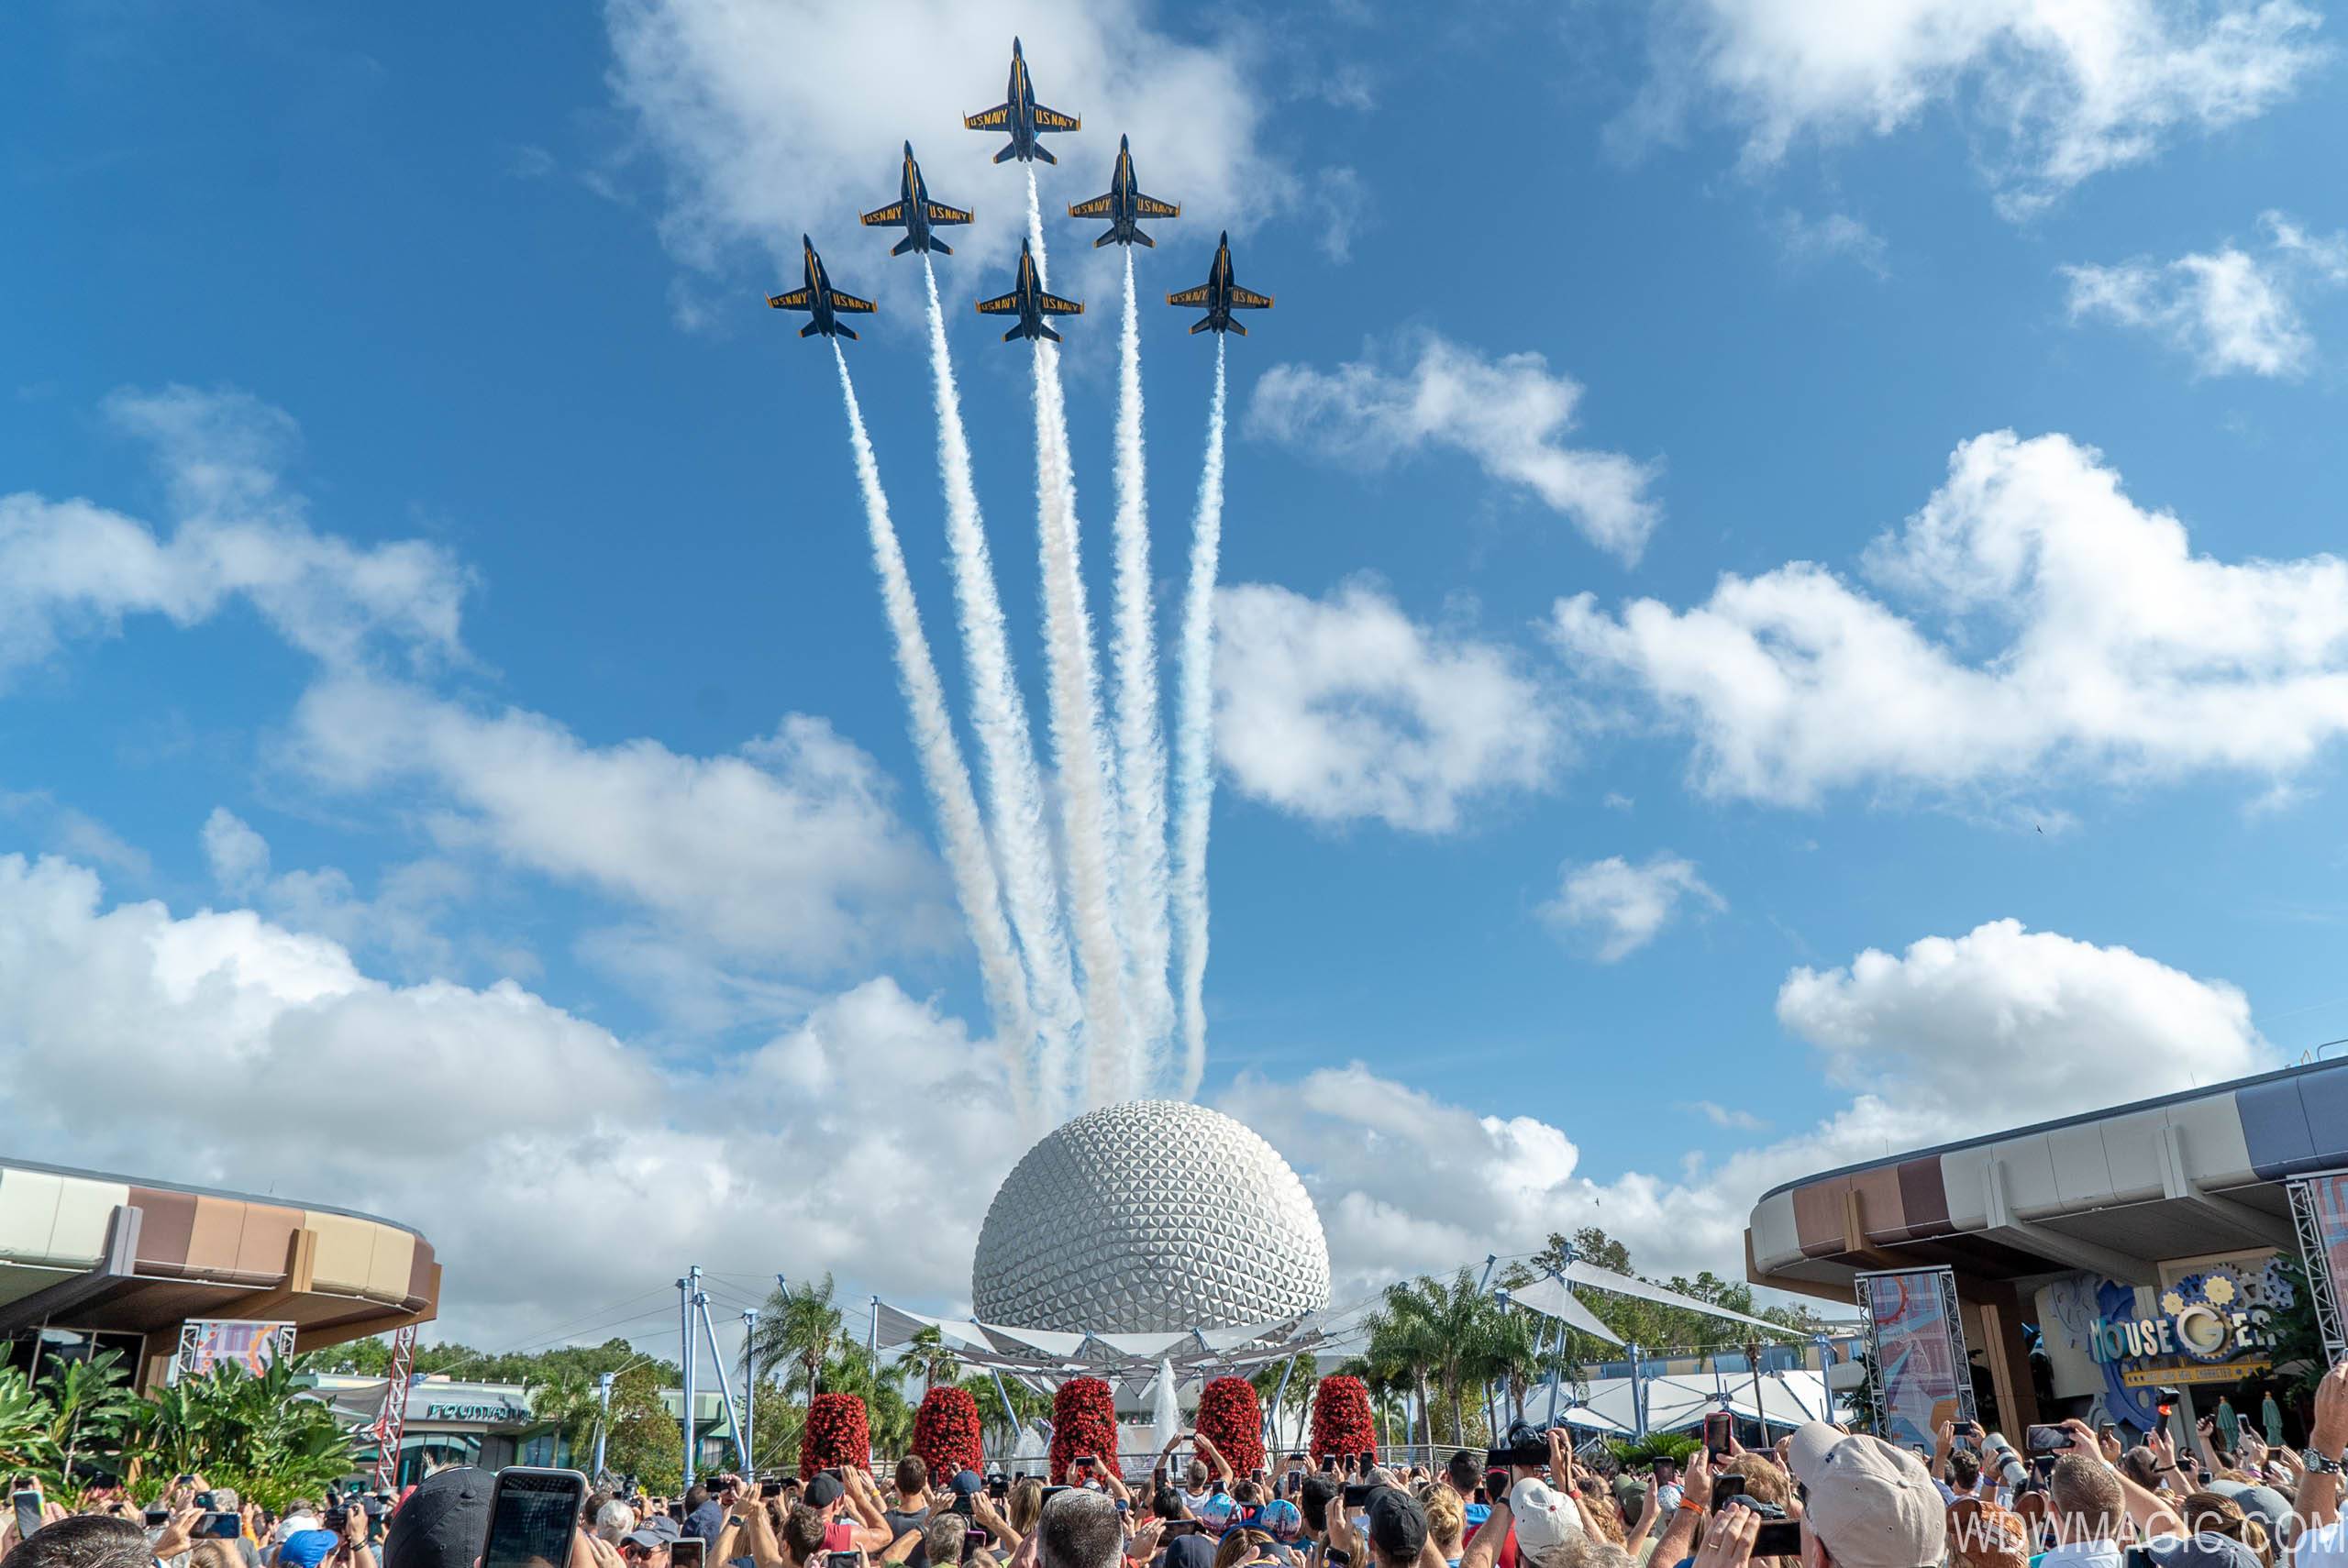 Blue Angels flyover of Epcot